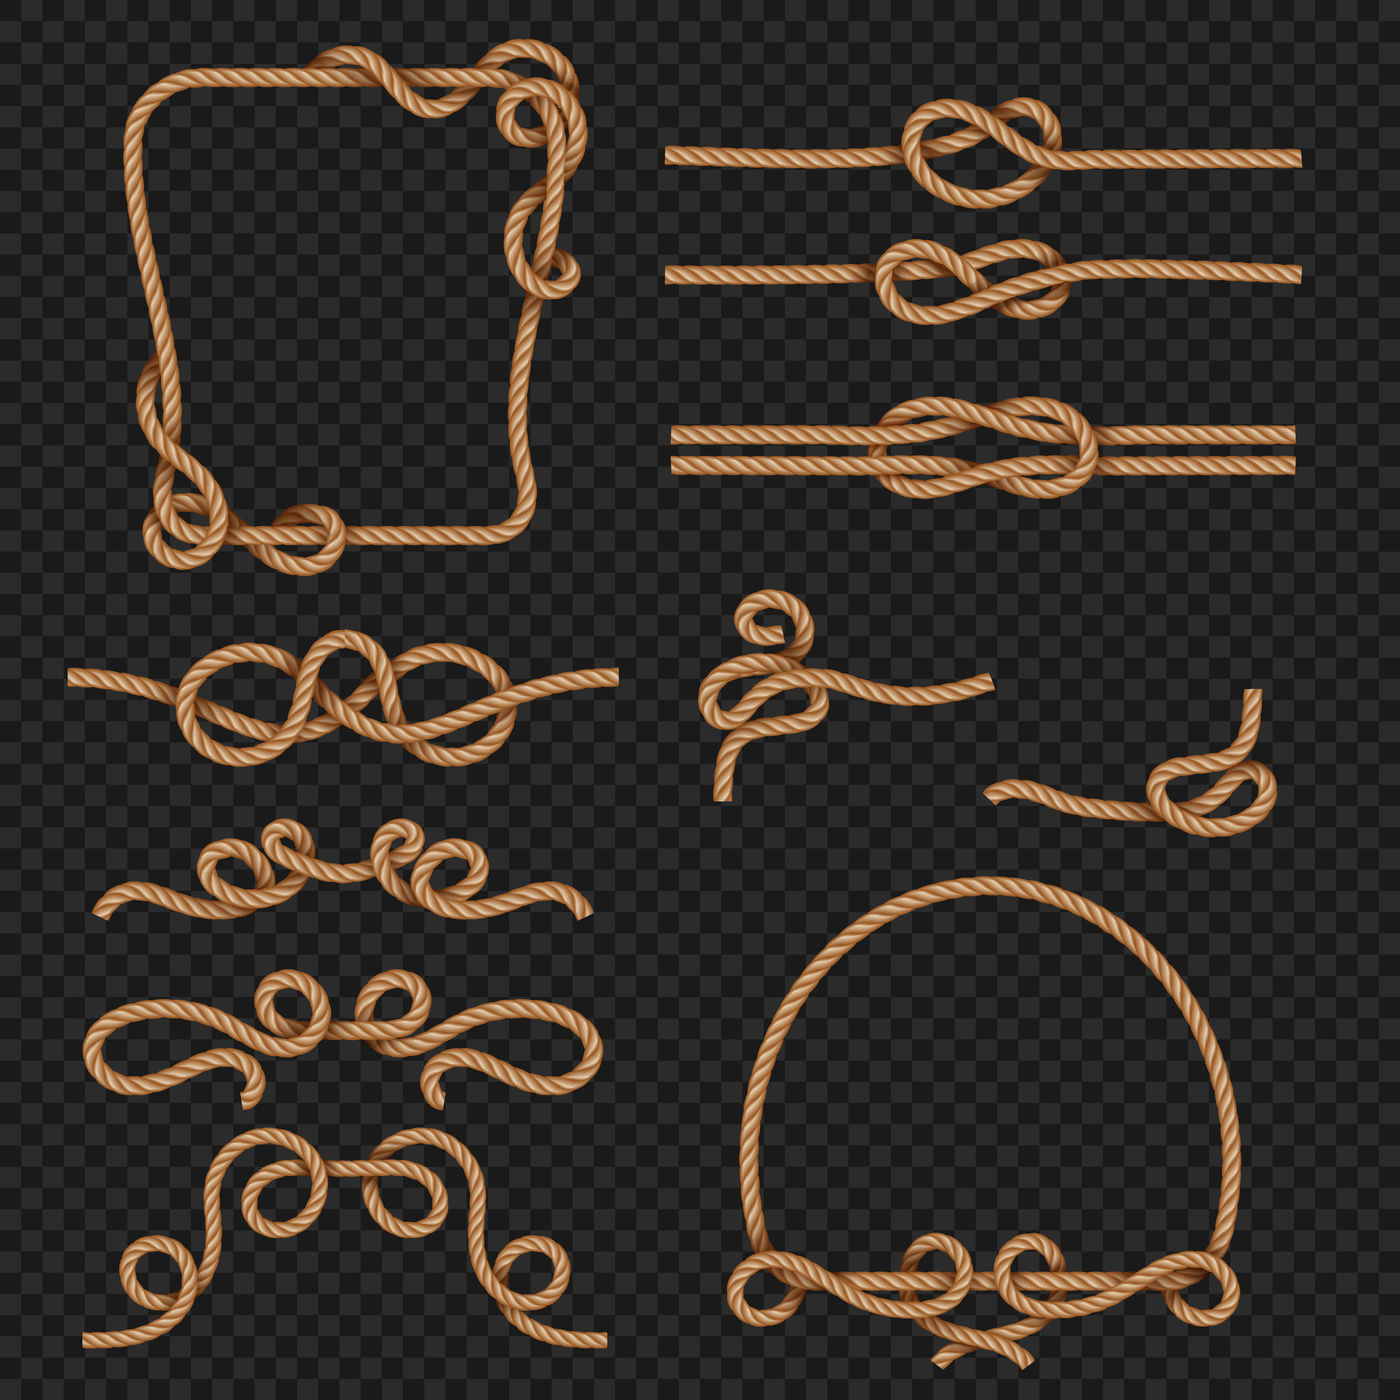 rope frame vector